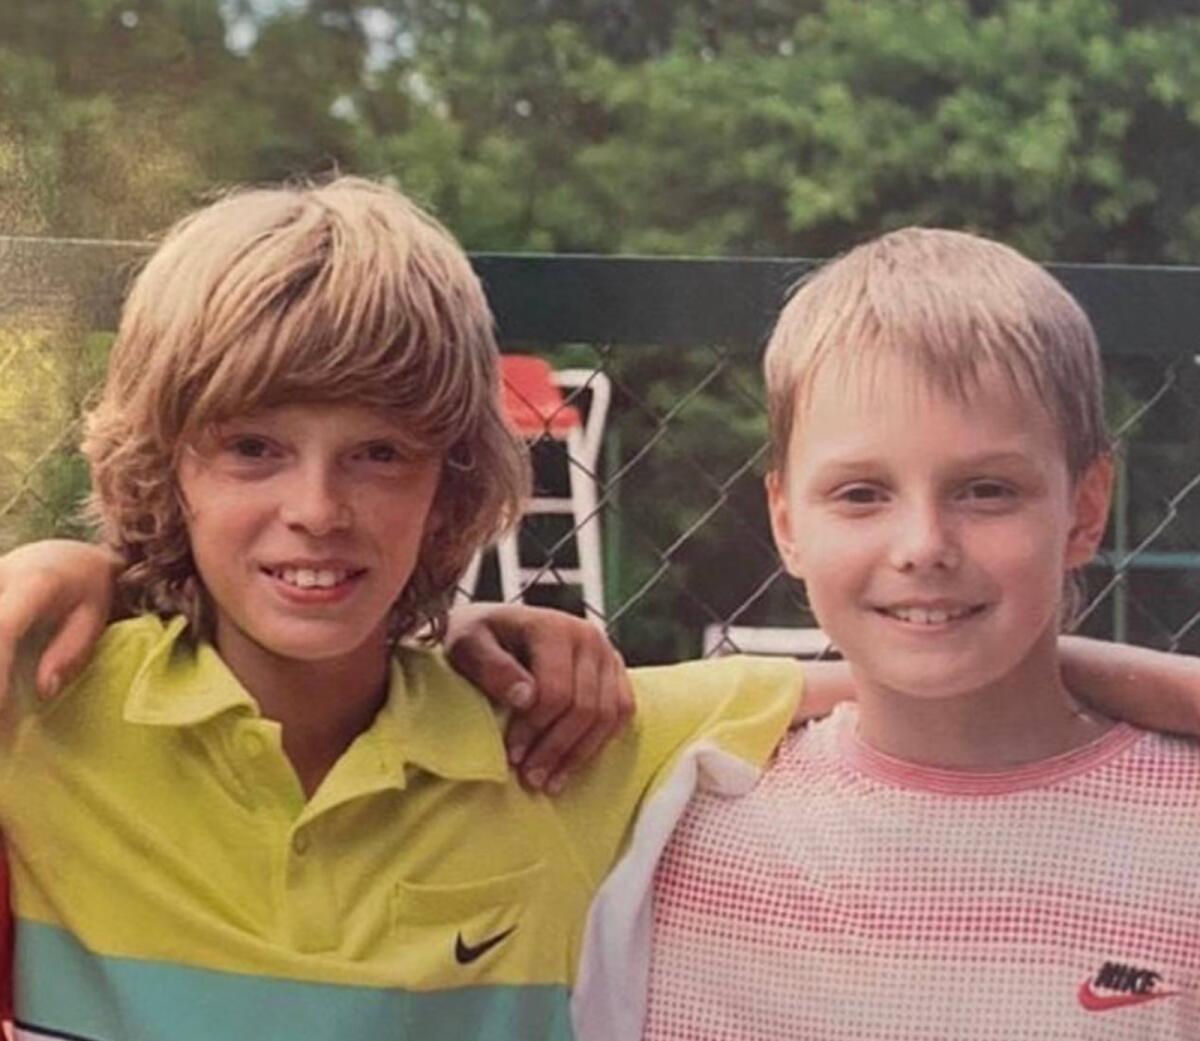 Alexander Bublik and Andrey Rublev were childhood friends in Russia. — X